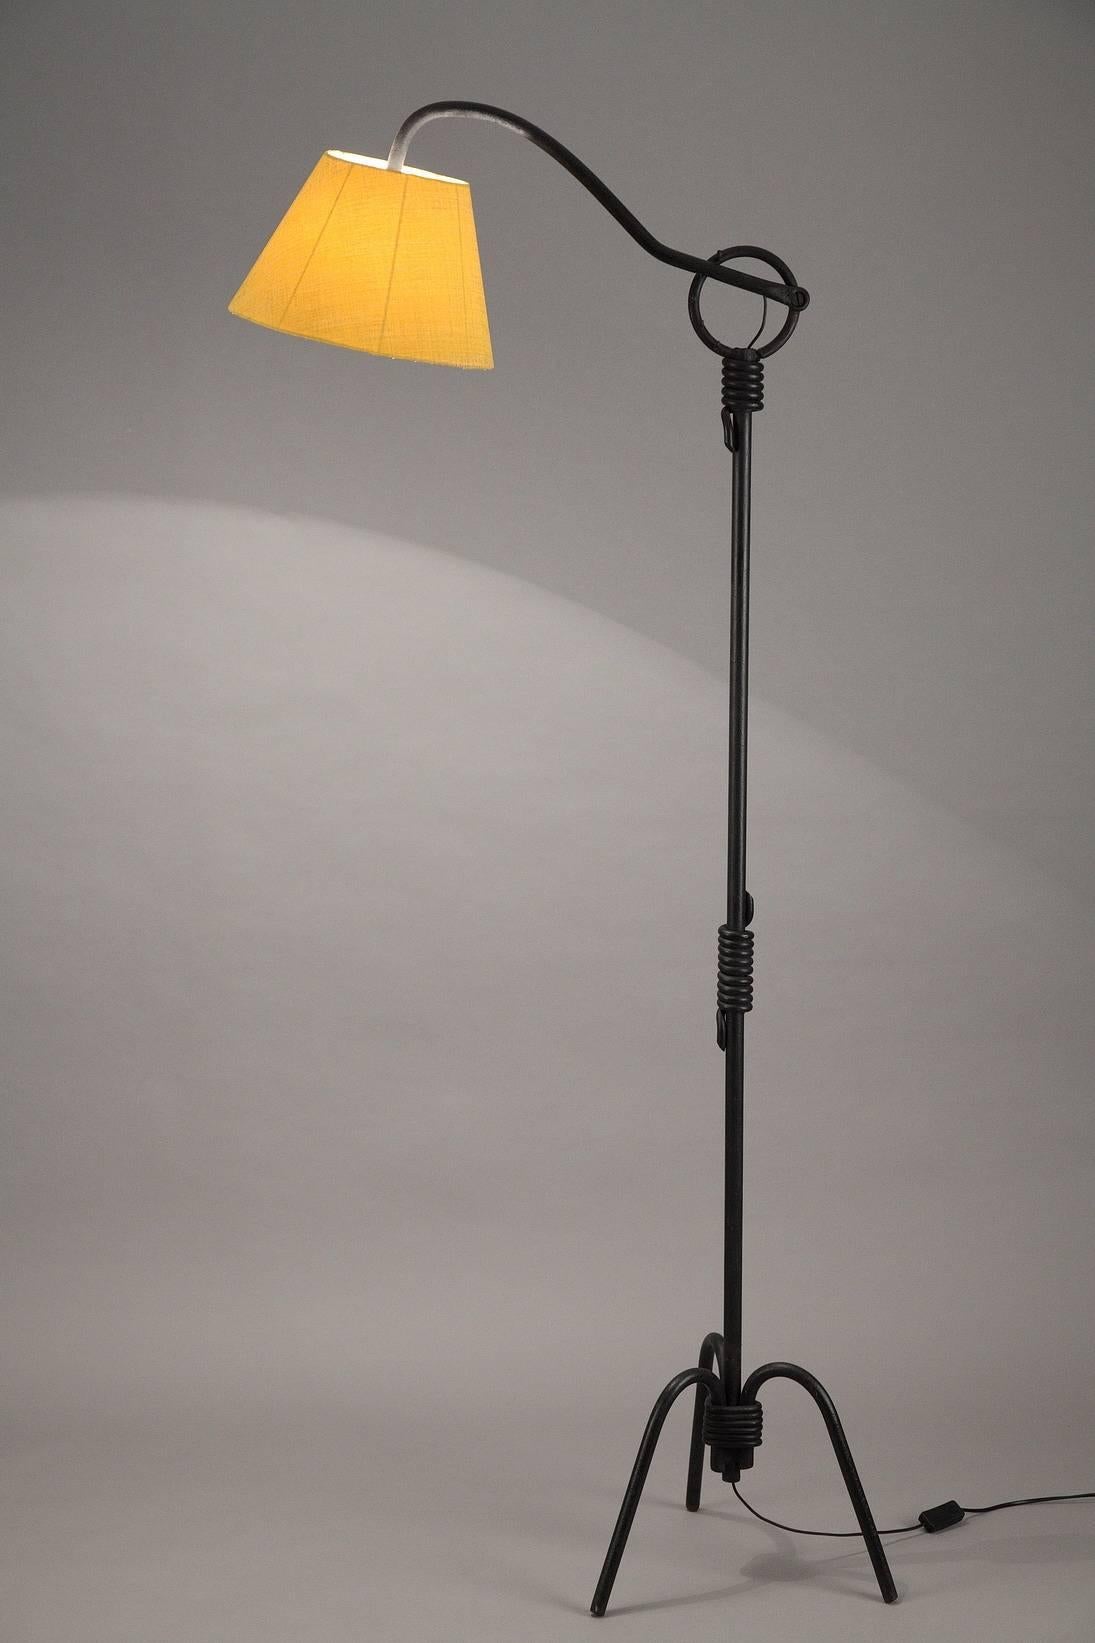 Black lacquered iron tripod lampstand after a model by Jean Royère, with an adjustable arm of light (five positions). Restaured yellow lampshade.

Jean Royère (1902-1981) was a French interior designer. From 1931, he learnt his new trade in the